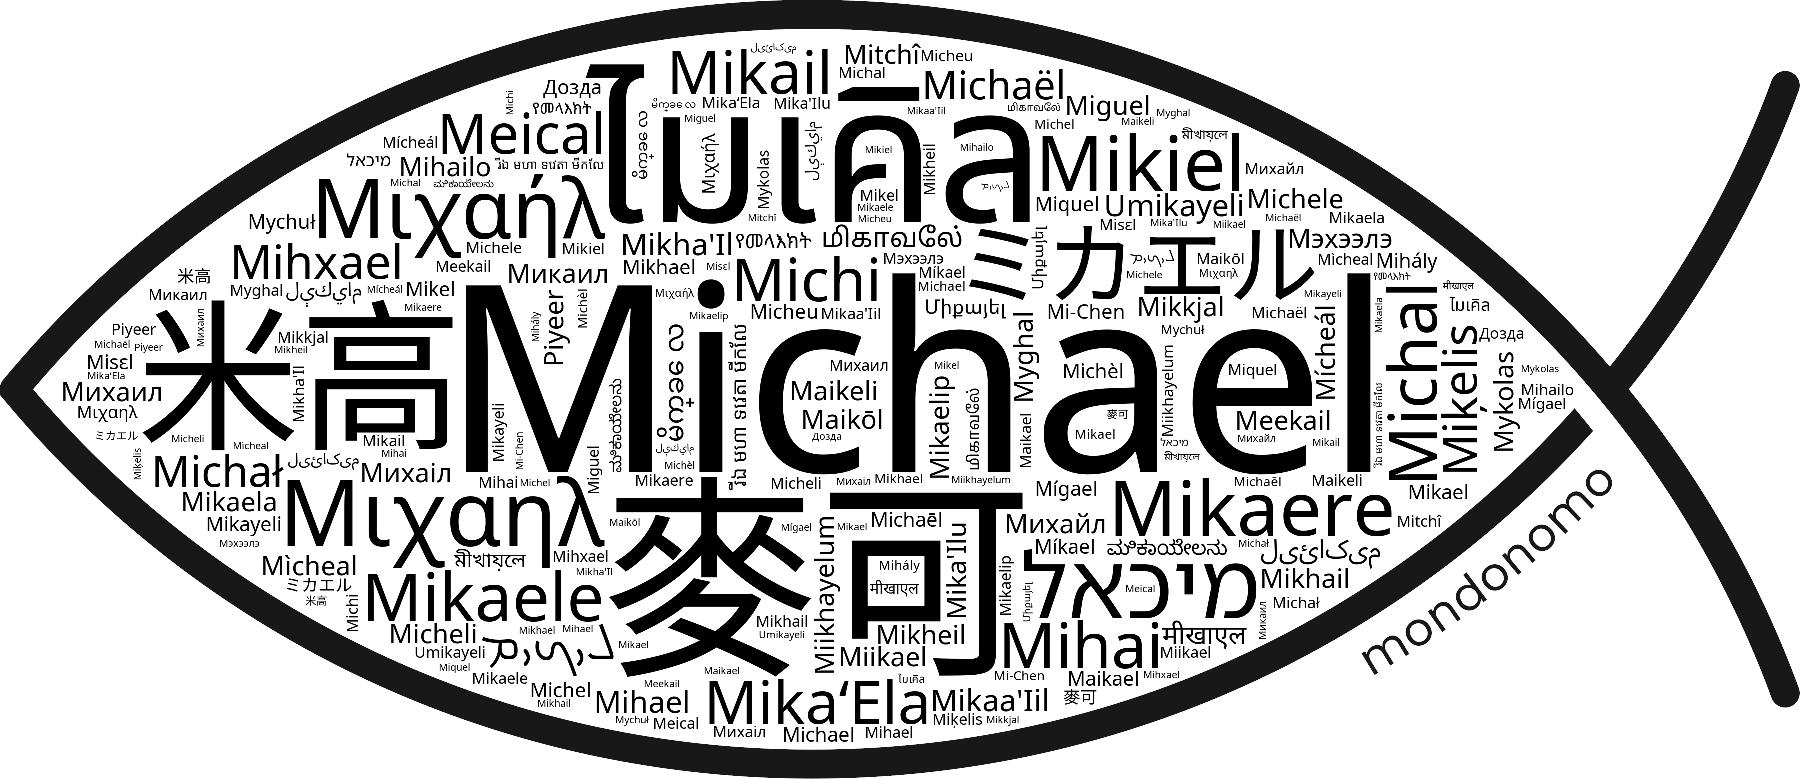 Name Michael in the world's Bibles